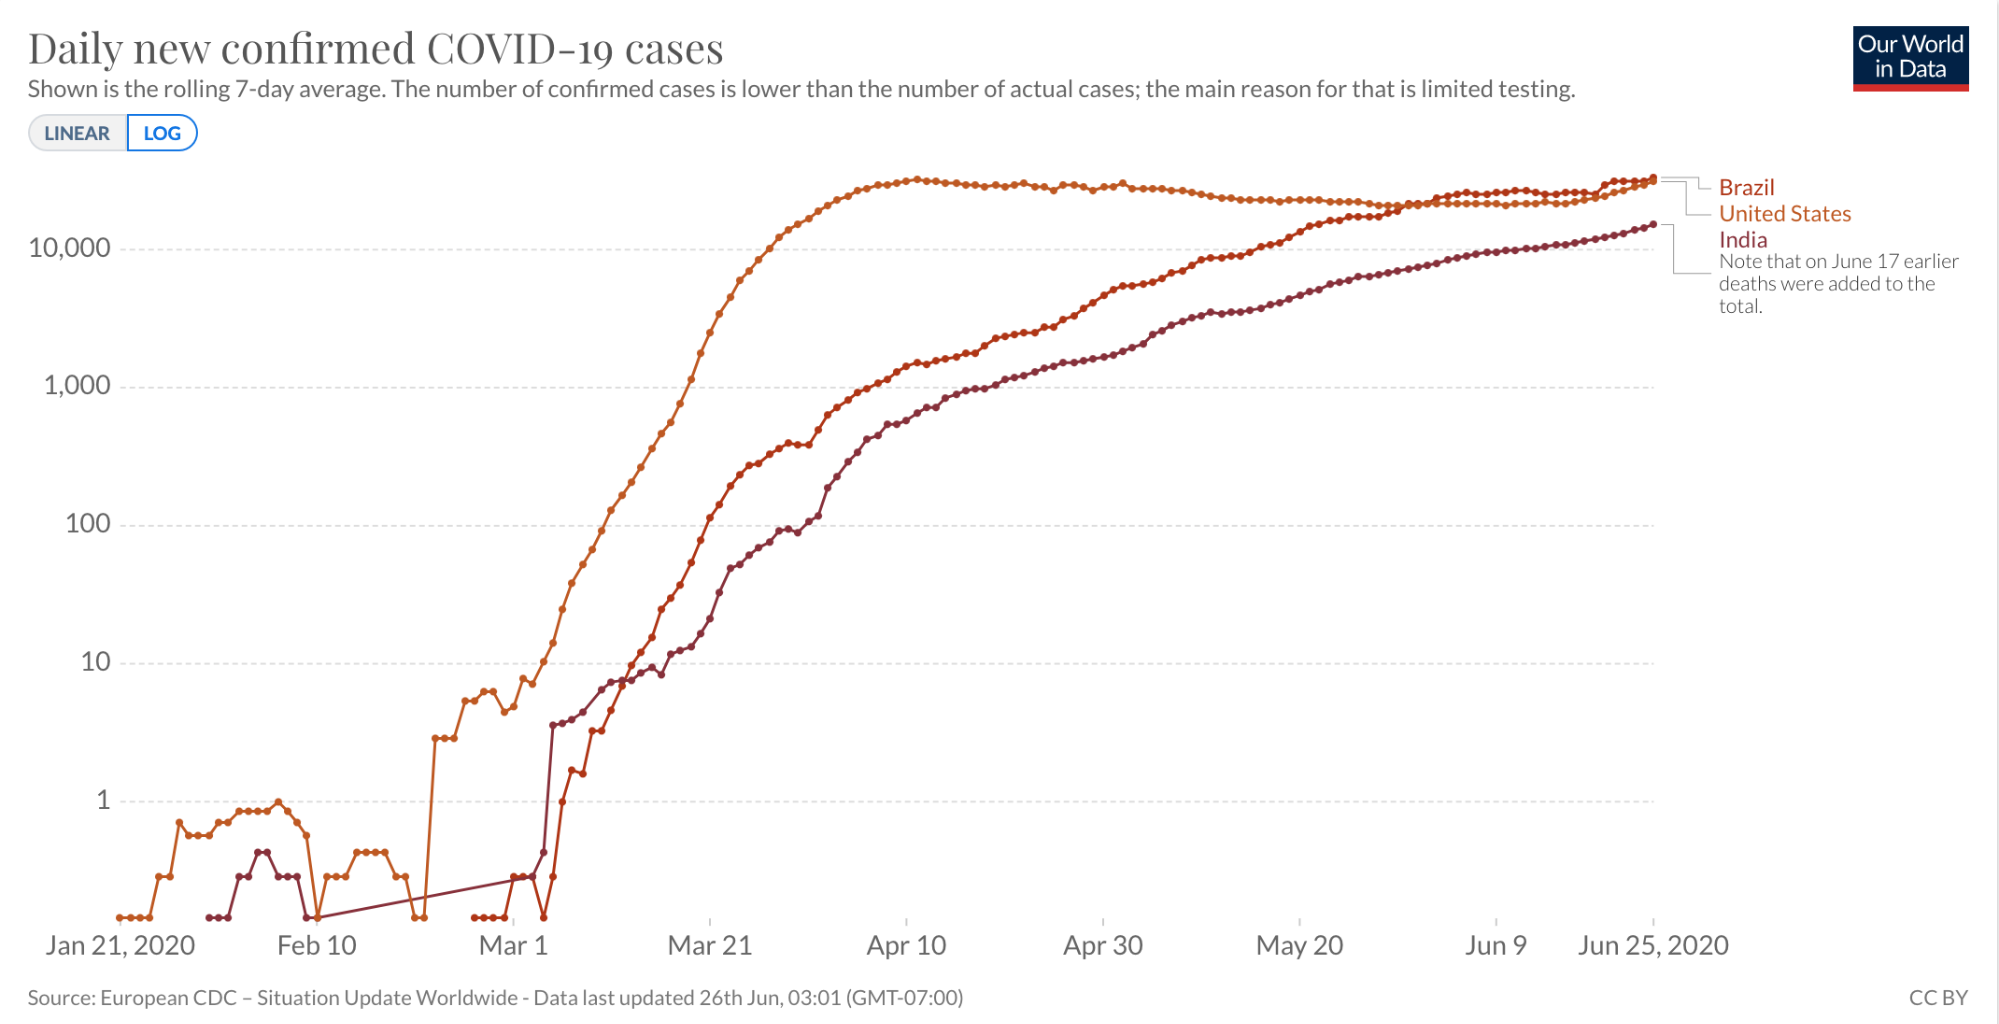 The rolling 7-day average of confirmed cases for Brazil, United States, and India, as a logarithmic scale.